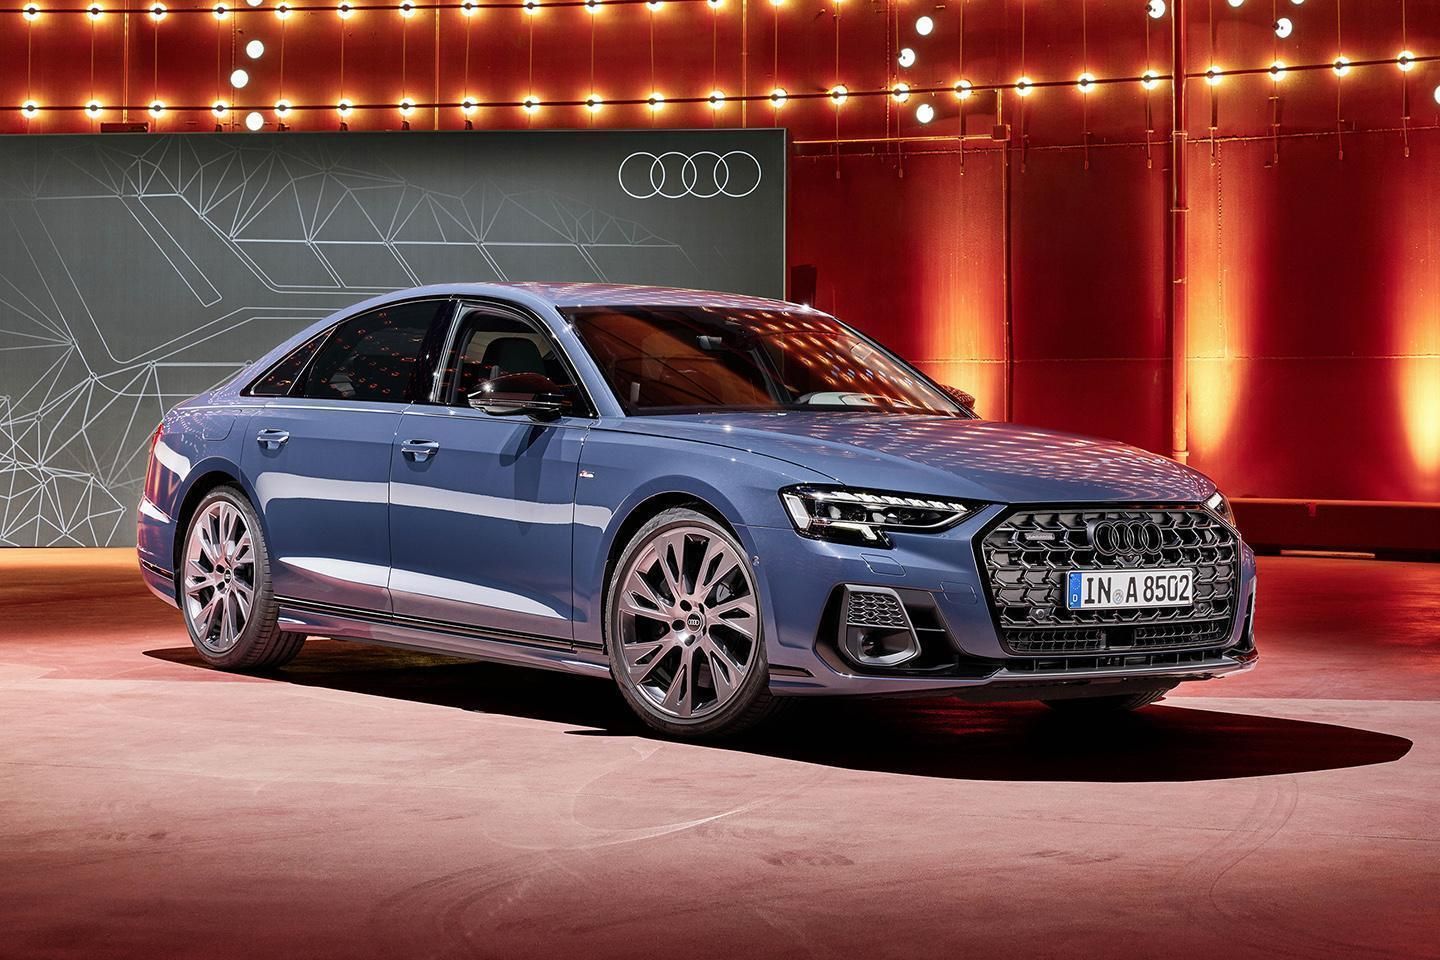 New Audi A8 luxury car unveiled